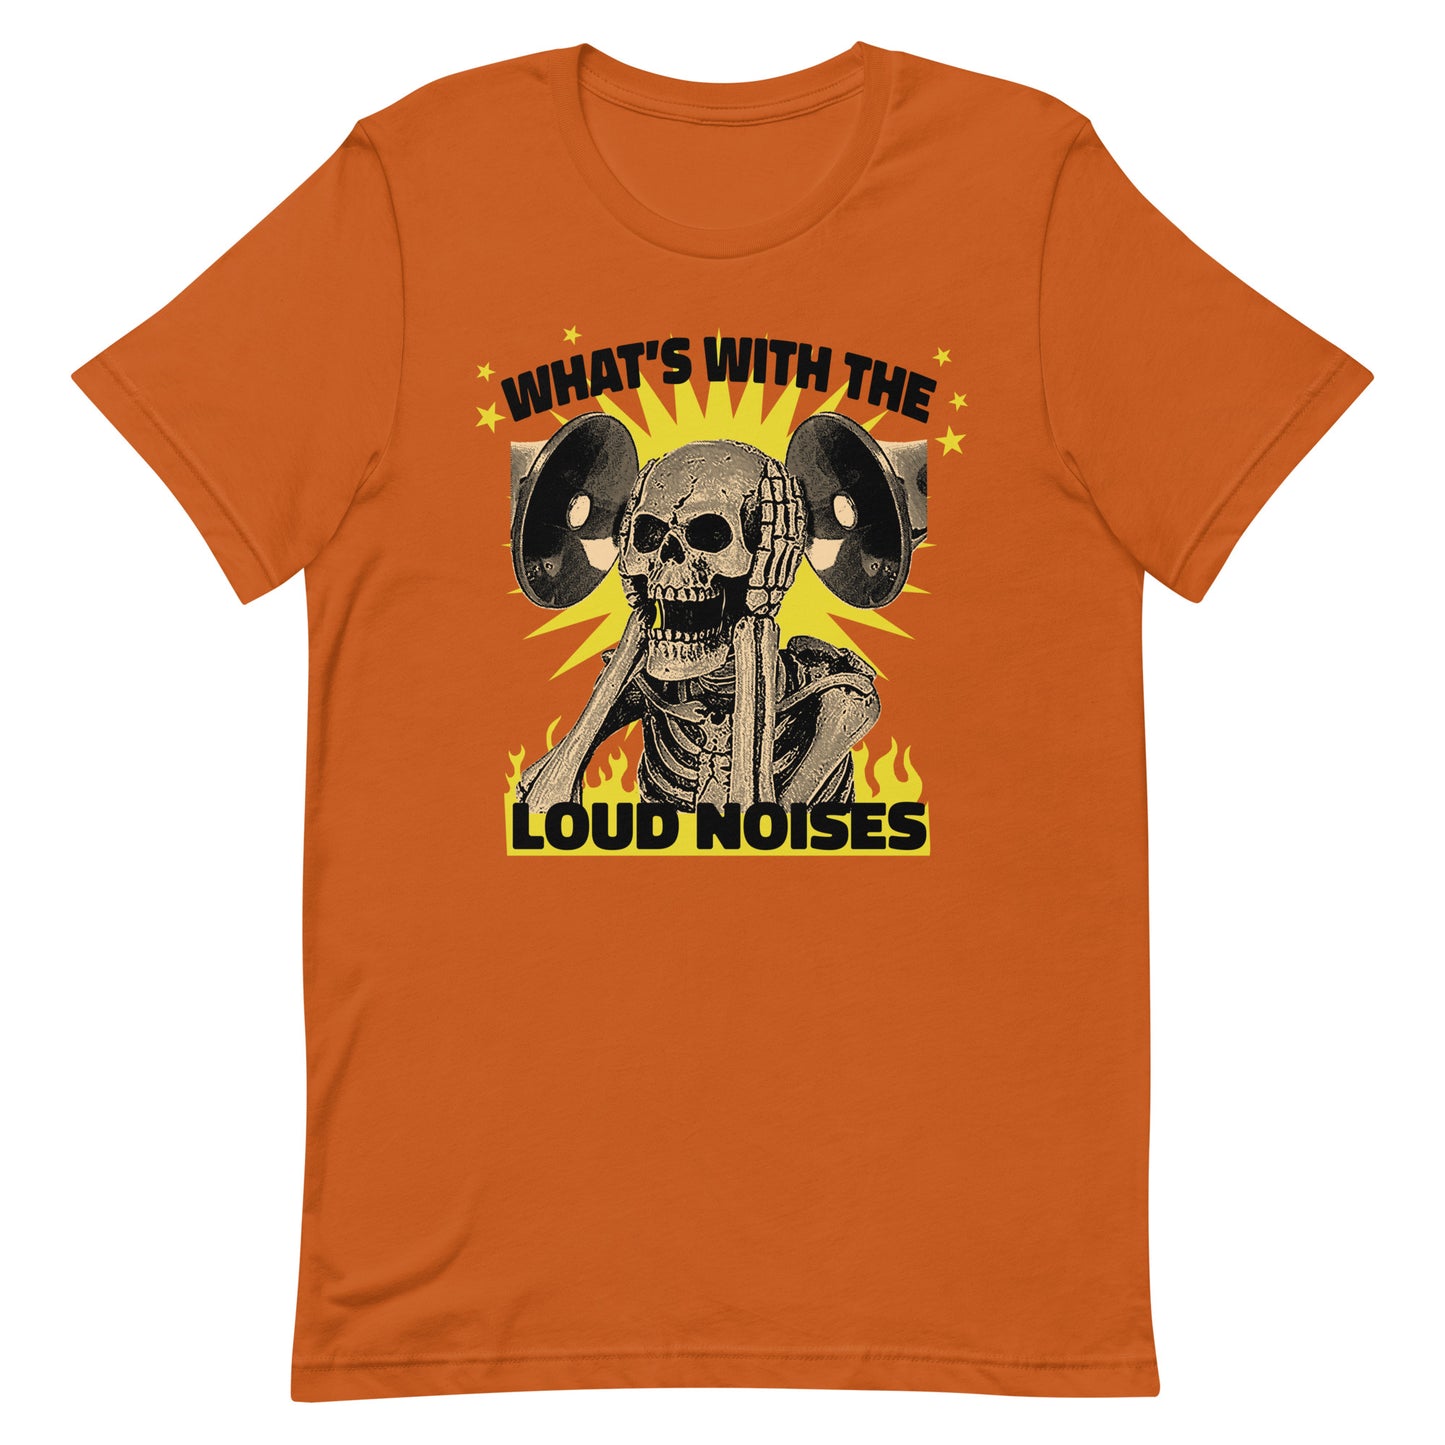 What's With the Loud Noises Unisex t-shirt